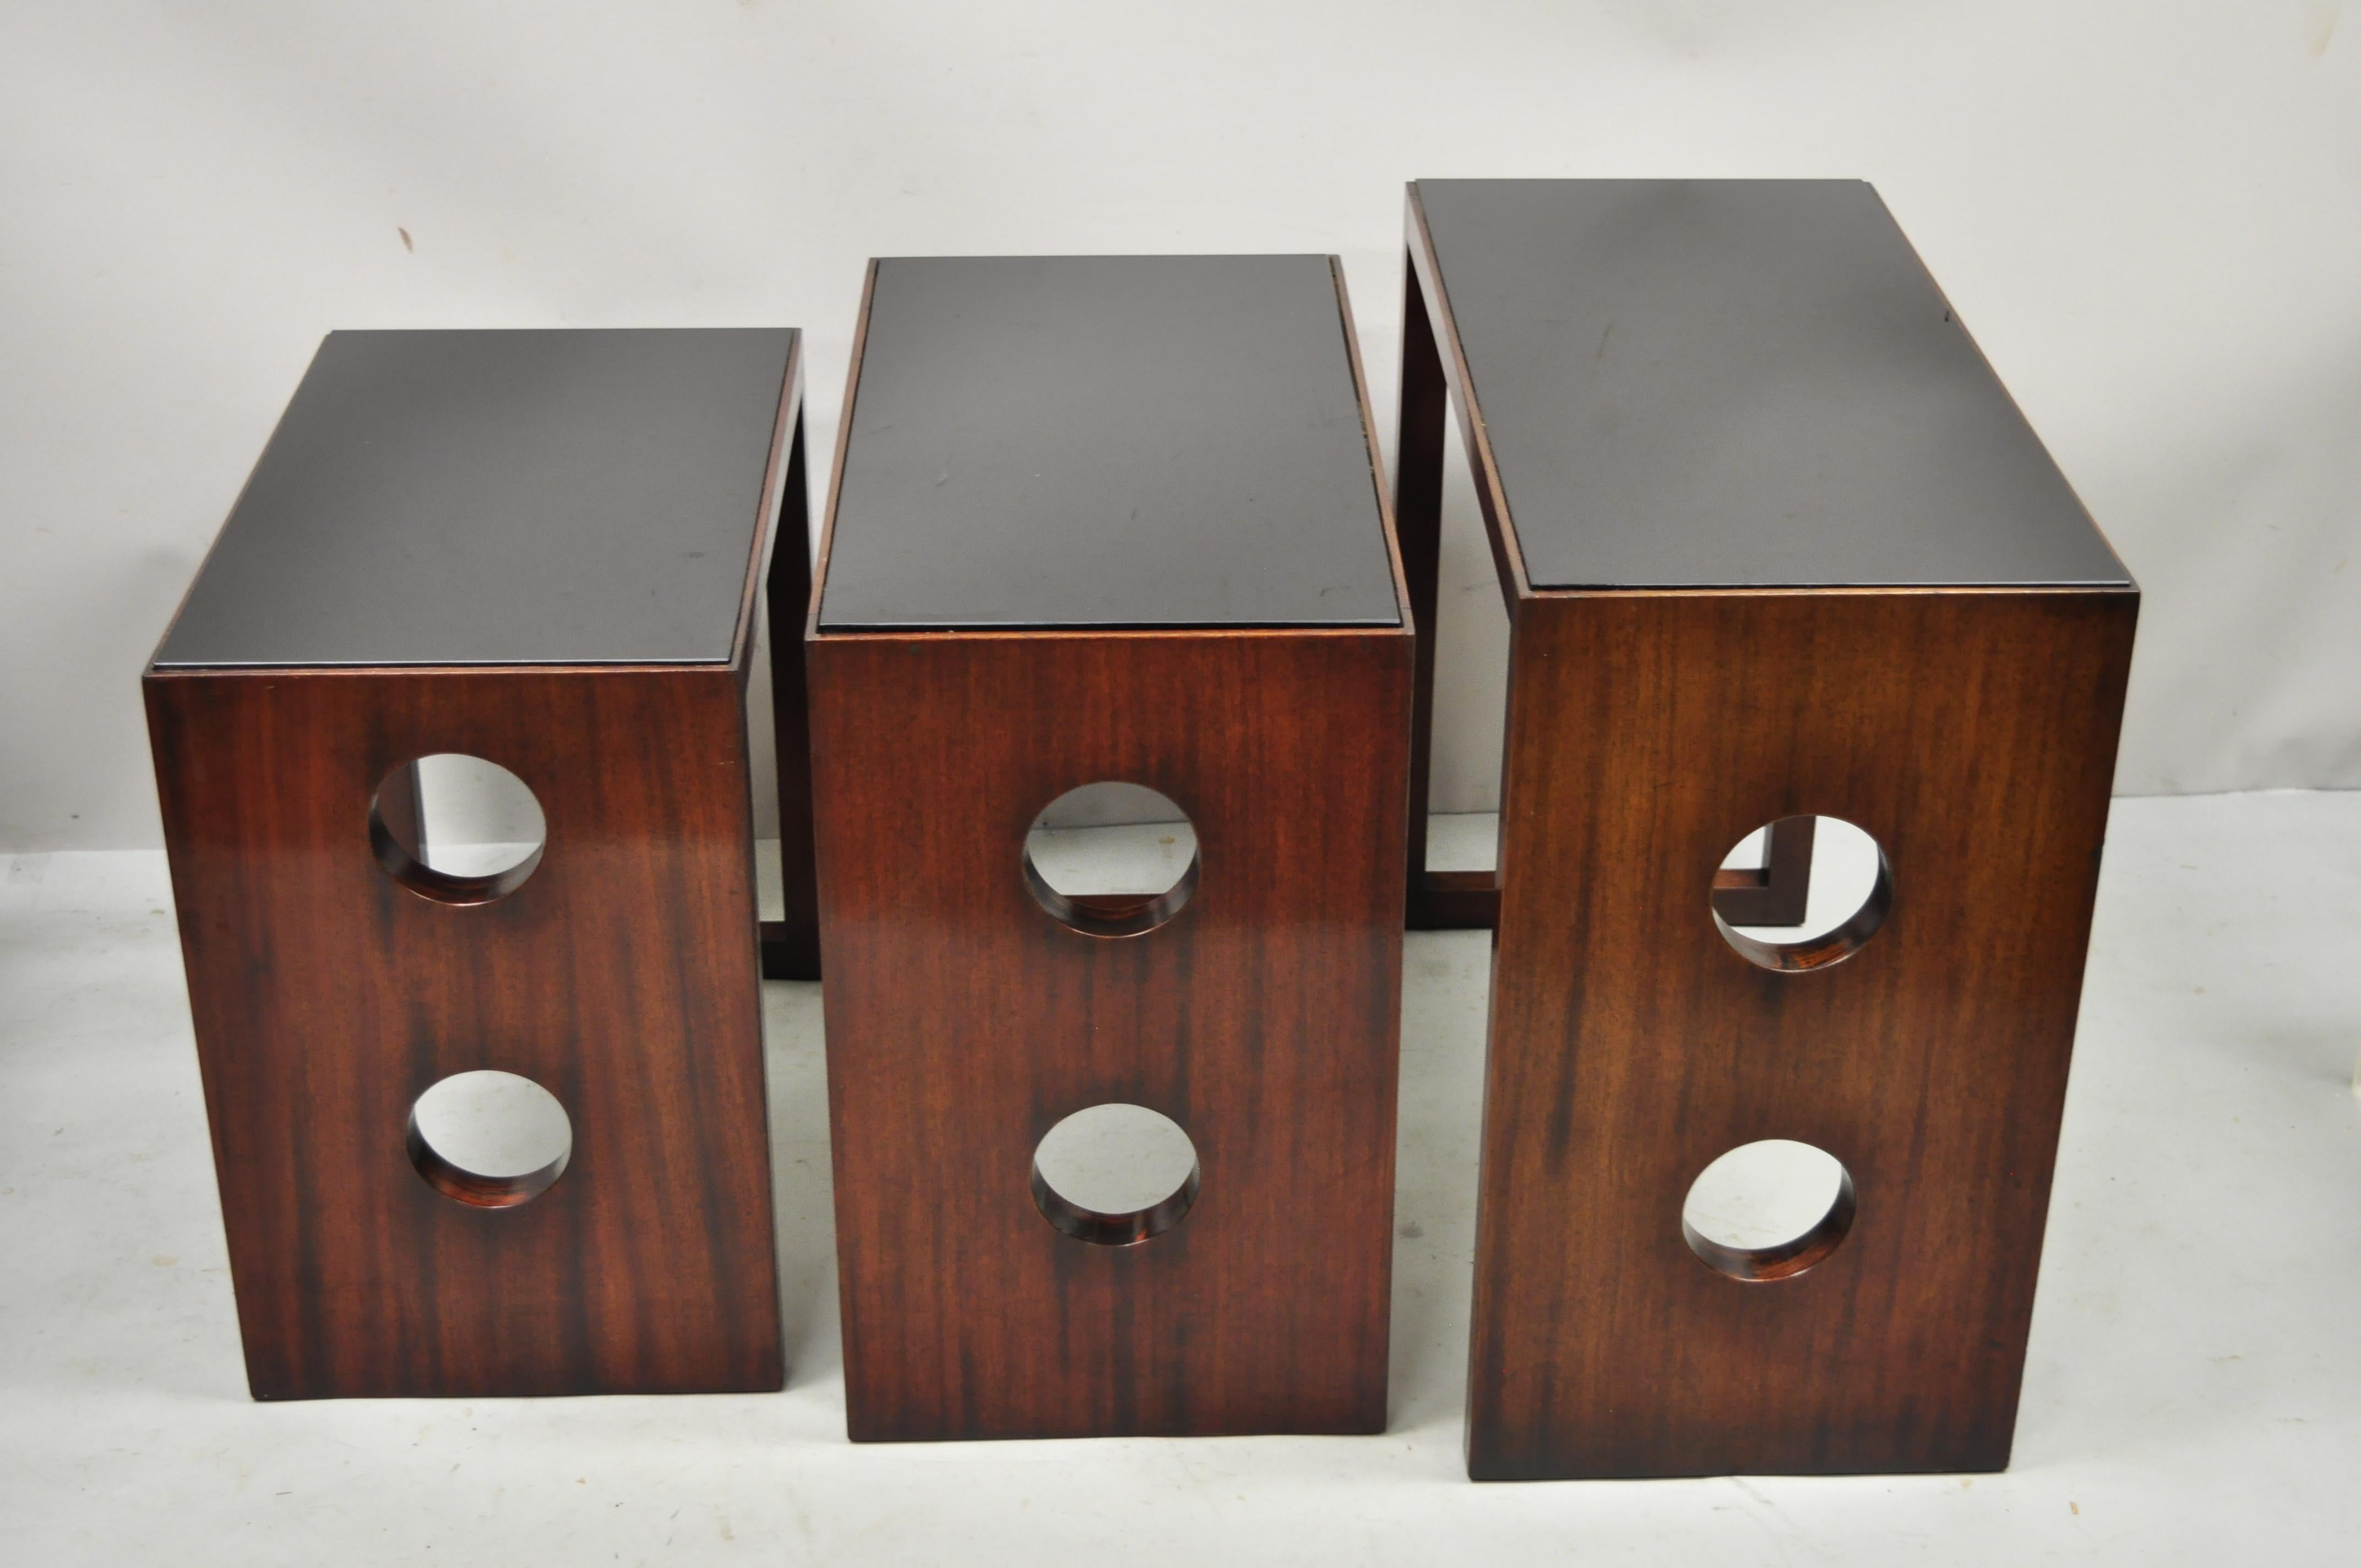 James Mont Mid-Century Modern mahogany & glass Top Art Deco nesting side tables. Set includes black glass tops, graduating size, very rare vintage set, clean modernist lines, quality American craftsmanship. Unmarked but attributed to James Mont.